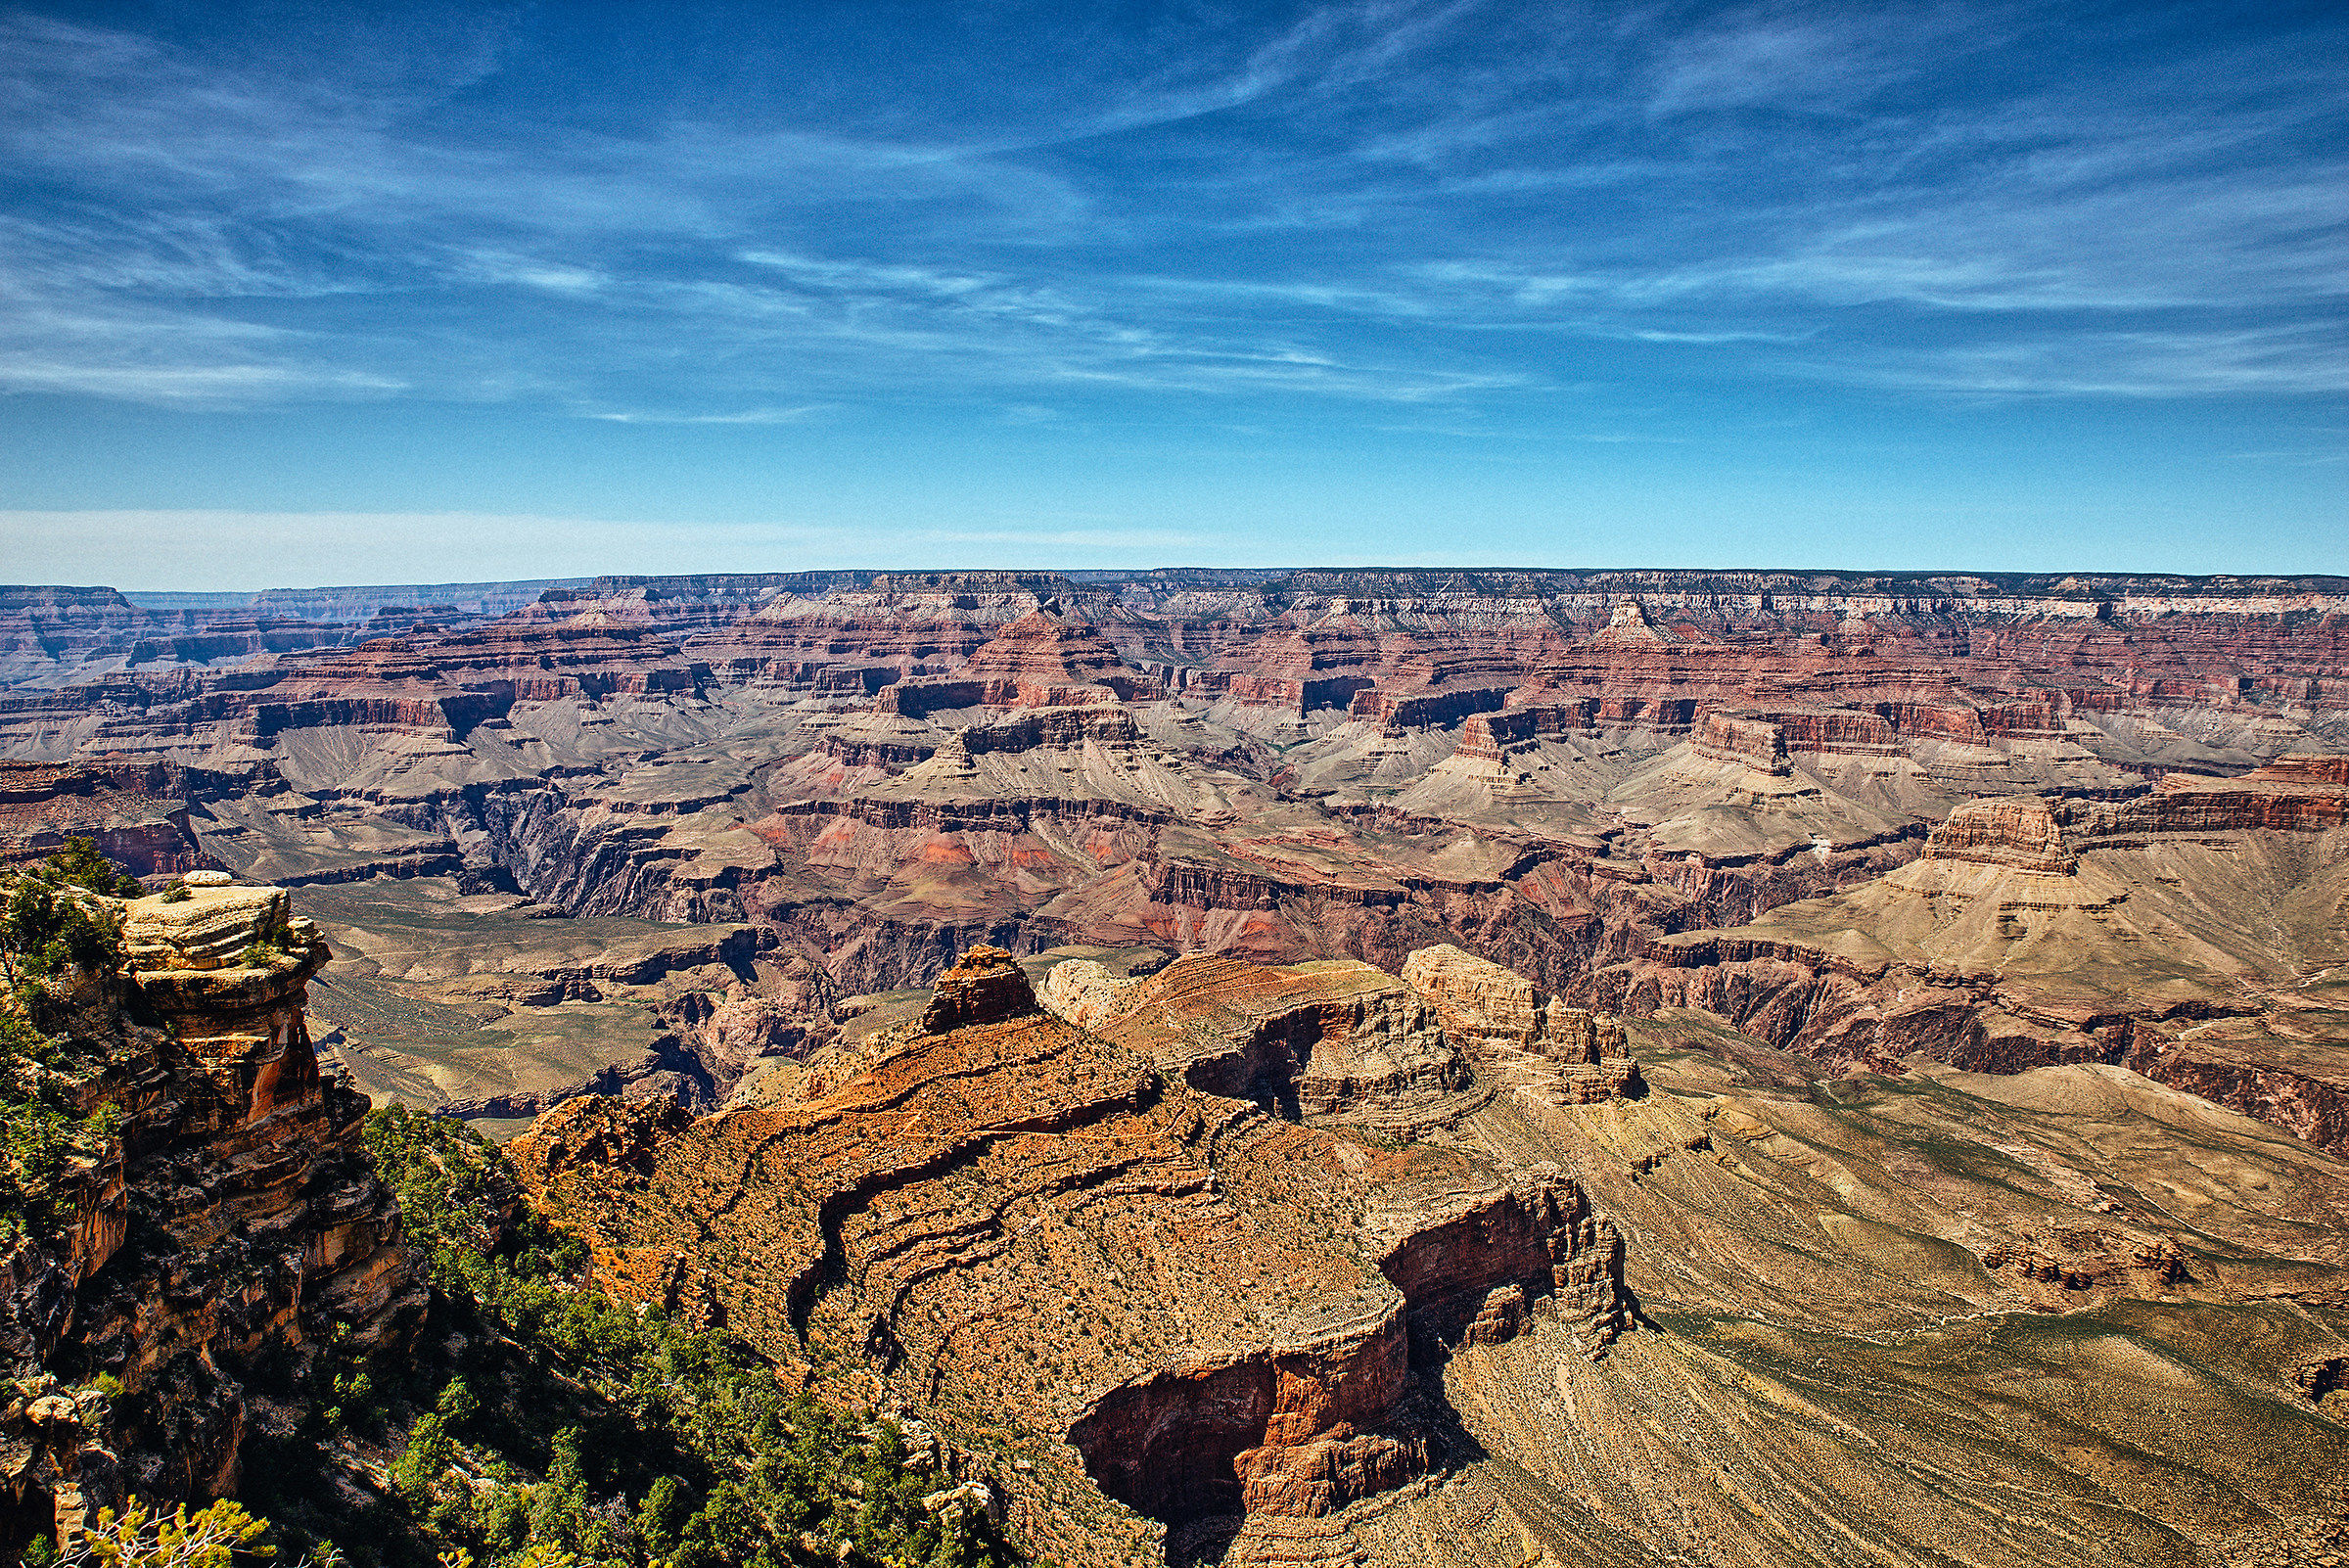 The grand canyon...